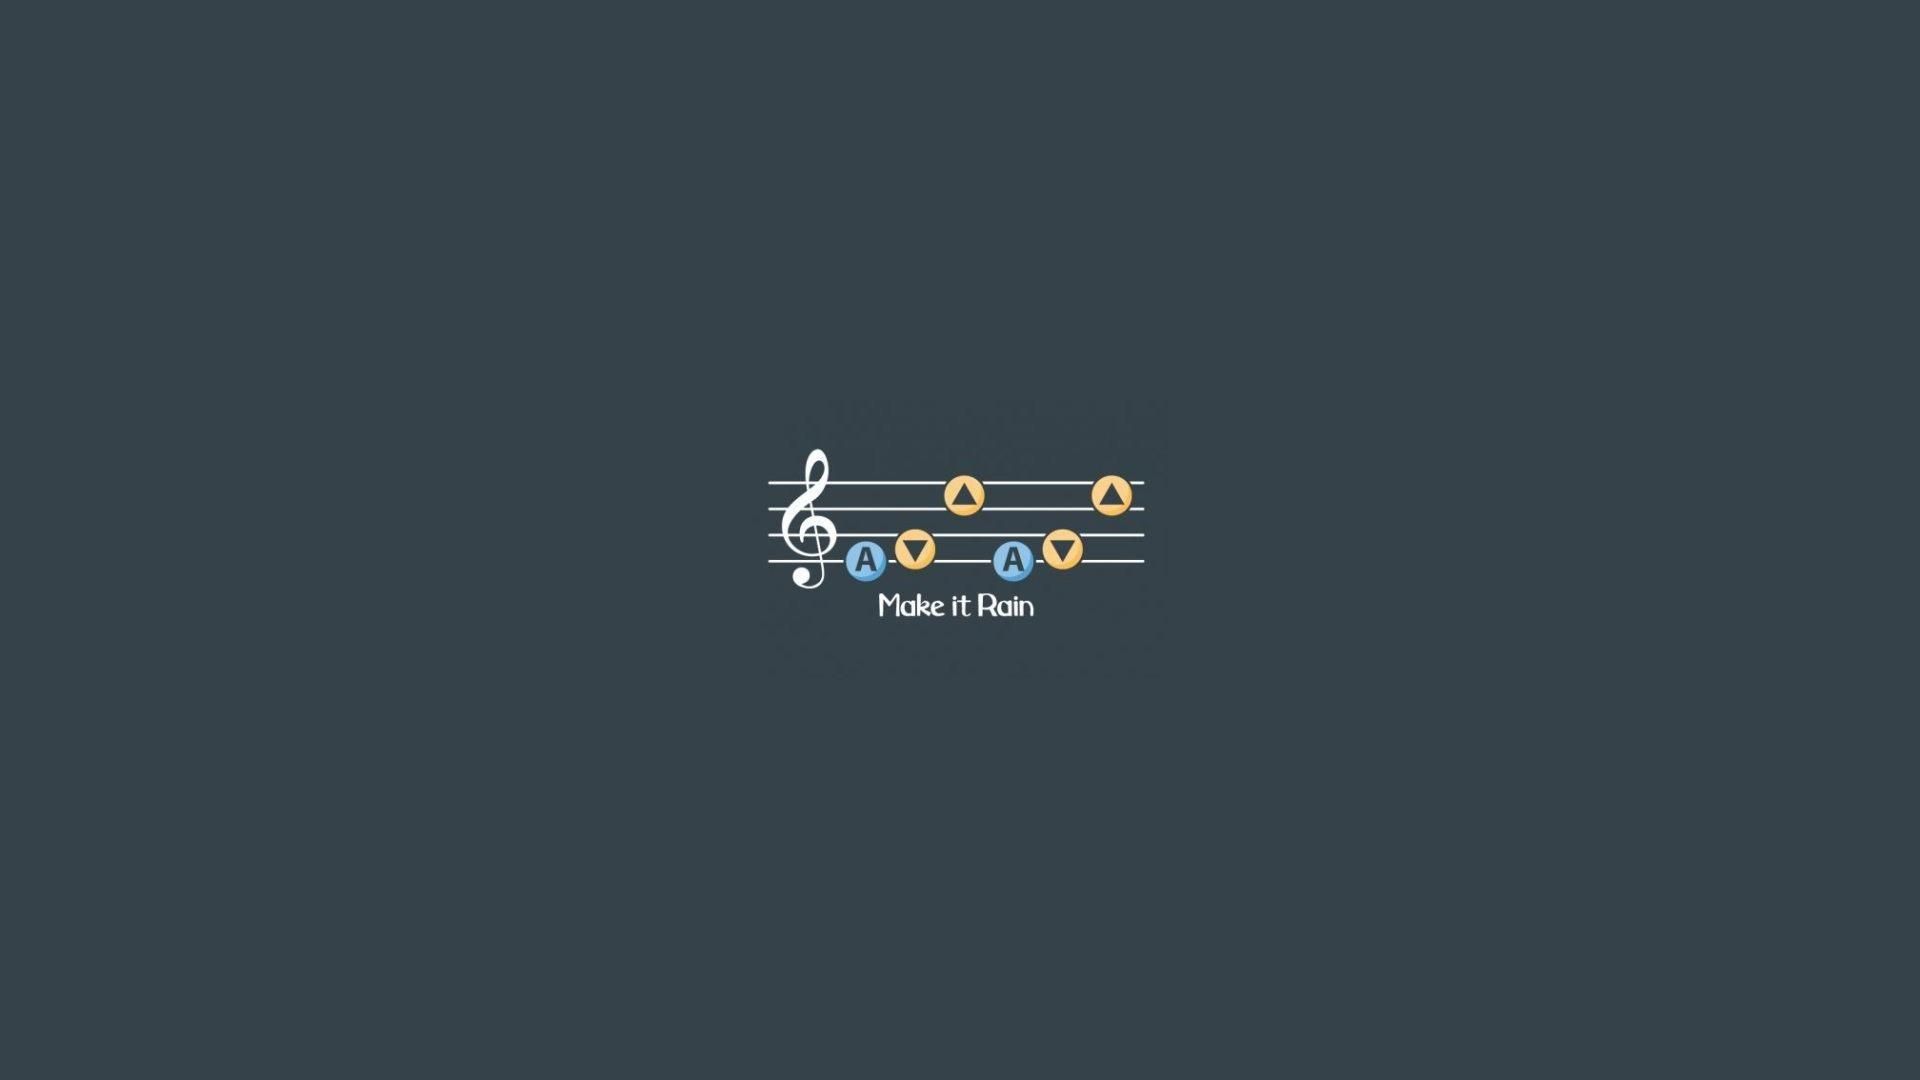 10 Perfect music wallpaper aesthetic laptop You Can Download It For ...